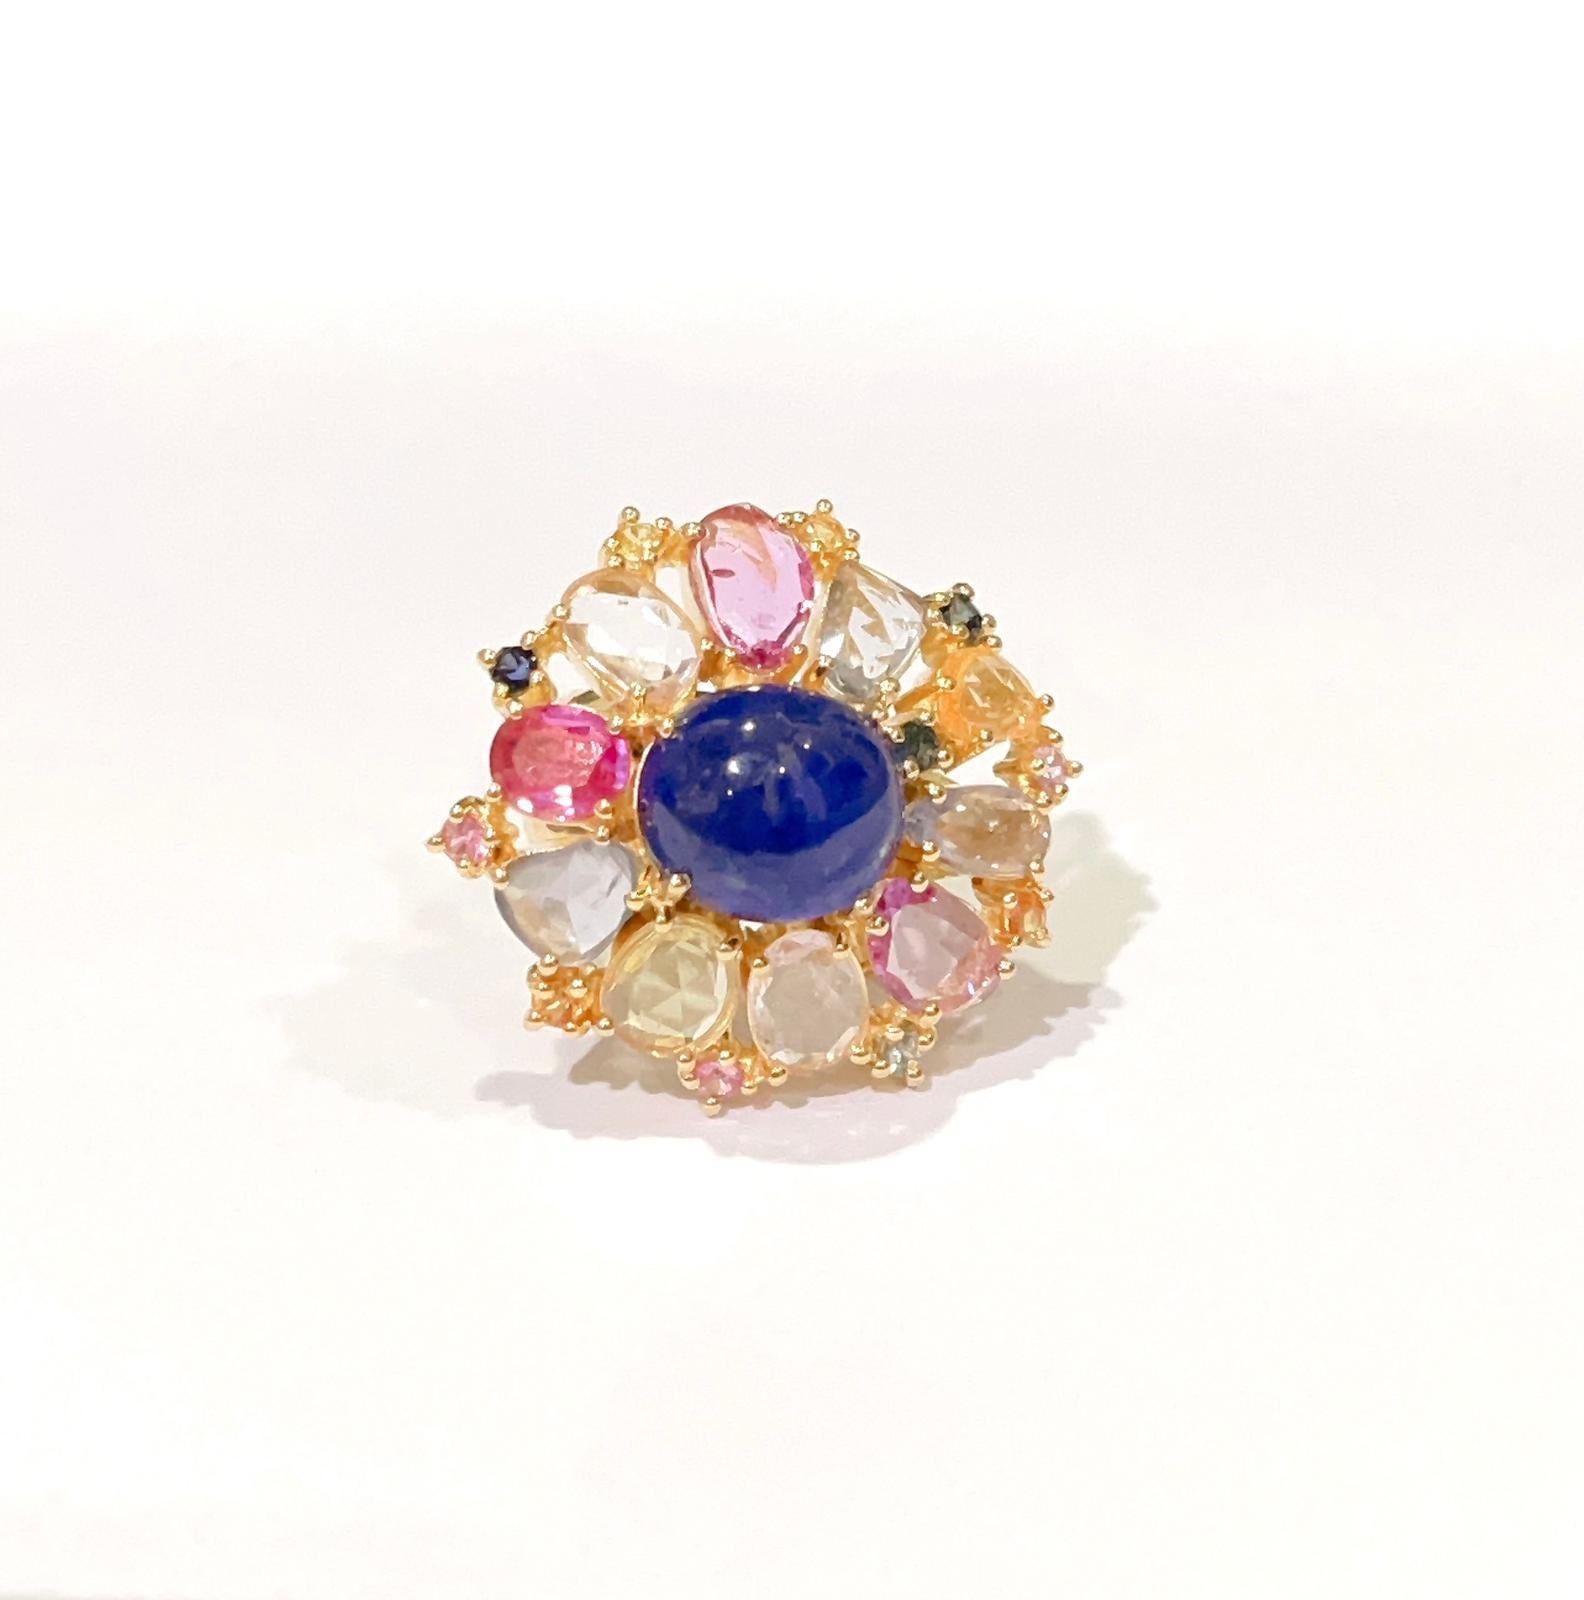 Bochic “Capri” Blue Sapphire, Ruby & Multi Color Rose Cut Sapphire Cocktail Ring Set In 18K Gold & Silver 
Multi natural gem Ring 
Beautiful Natural Blue Sapphire from Sri Lanka  - 12 carats
Set in the middle 
Round/Oval shape cabochon 
Natural